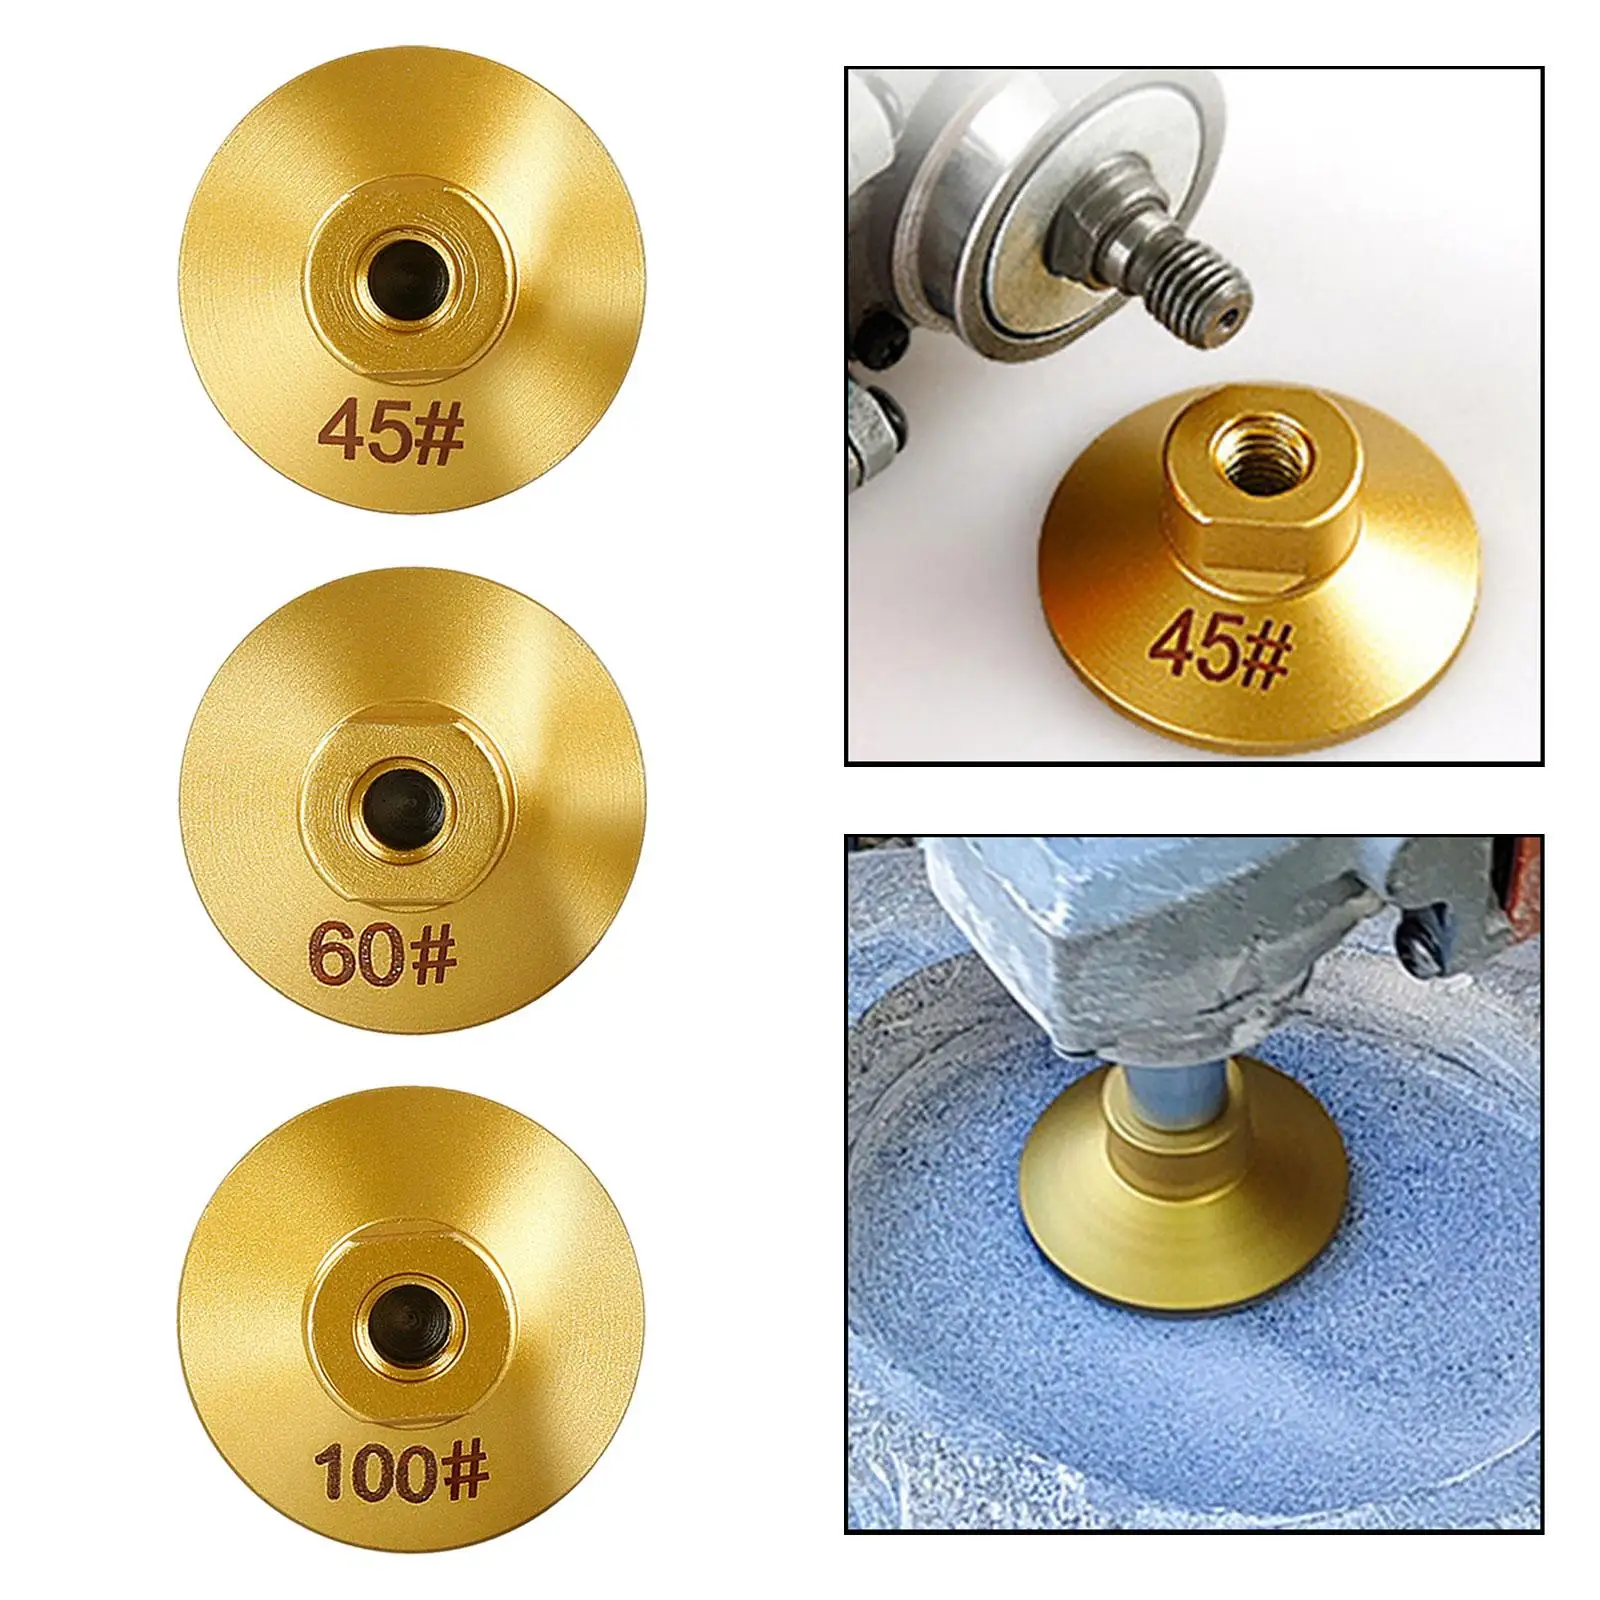 

2inch Angle Grinder Diamond Grinding Disc Dry or Wet Use Durable Polishing Pad for Granite Masonry Ceramic Porcelain Tiles